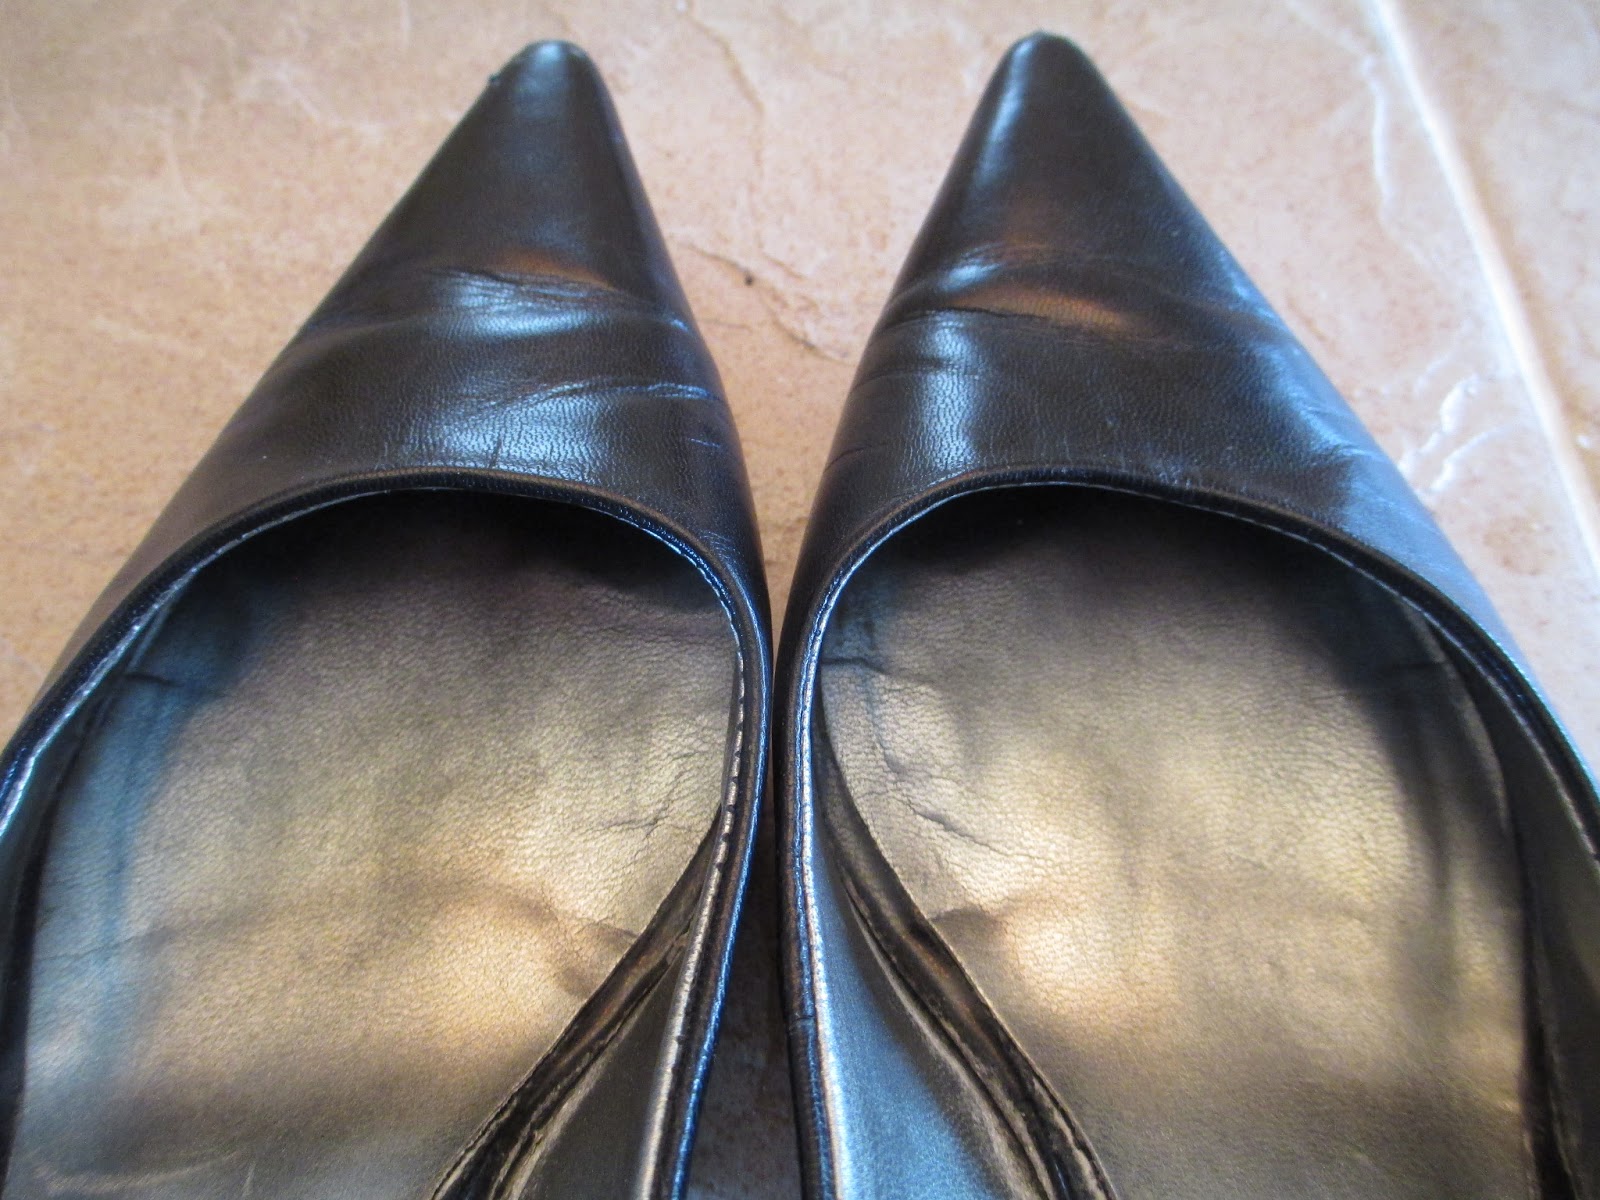 Trashed and Abused Shoes: My Collection: Nine West High-Heeled Pumps